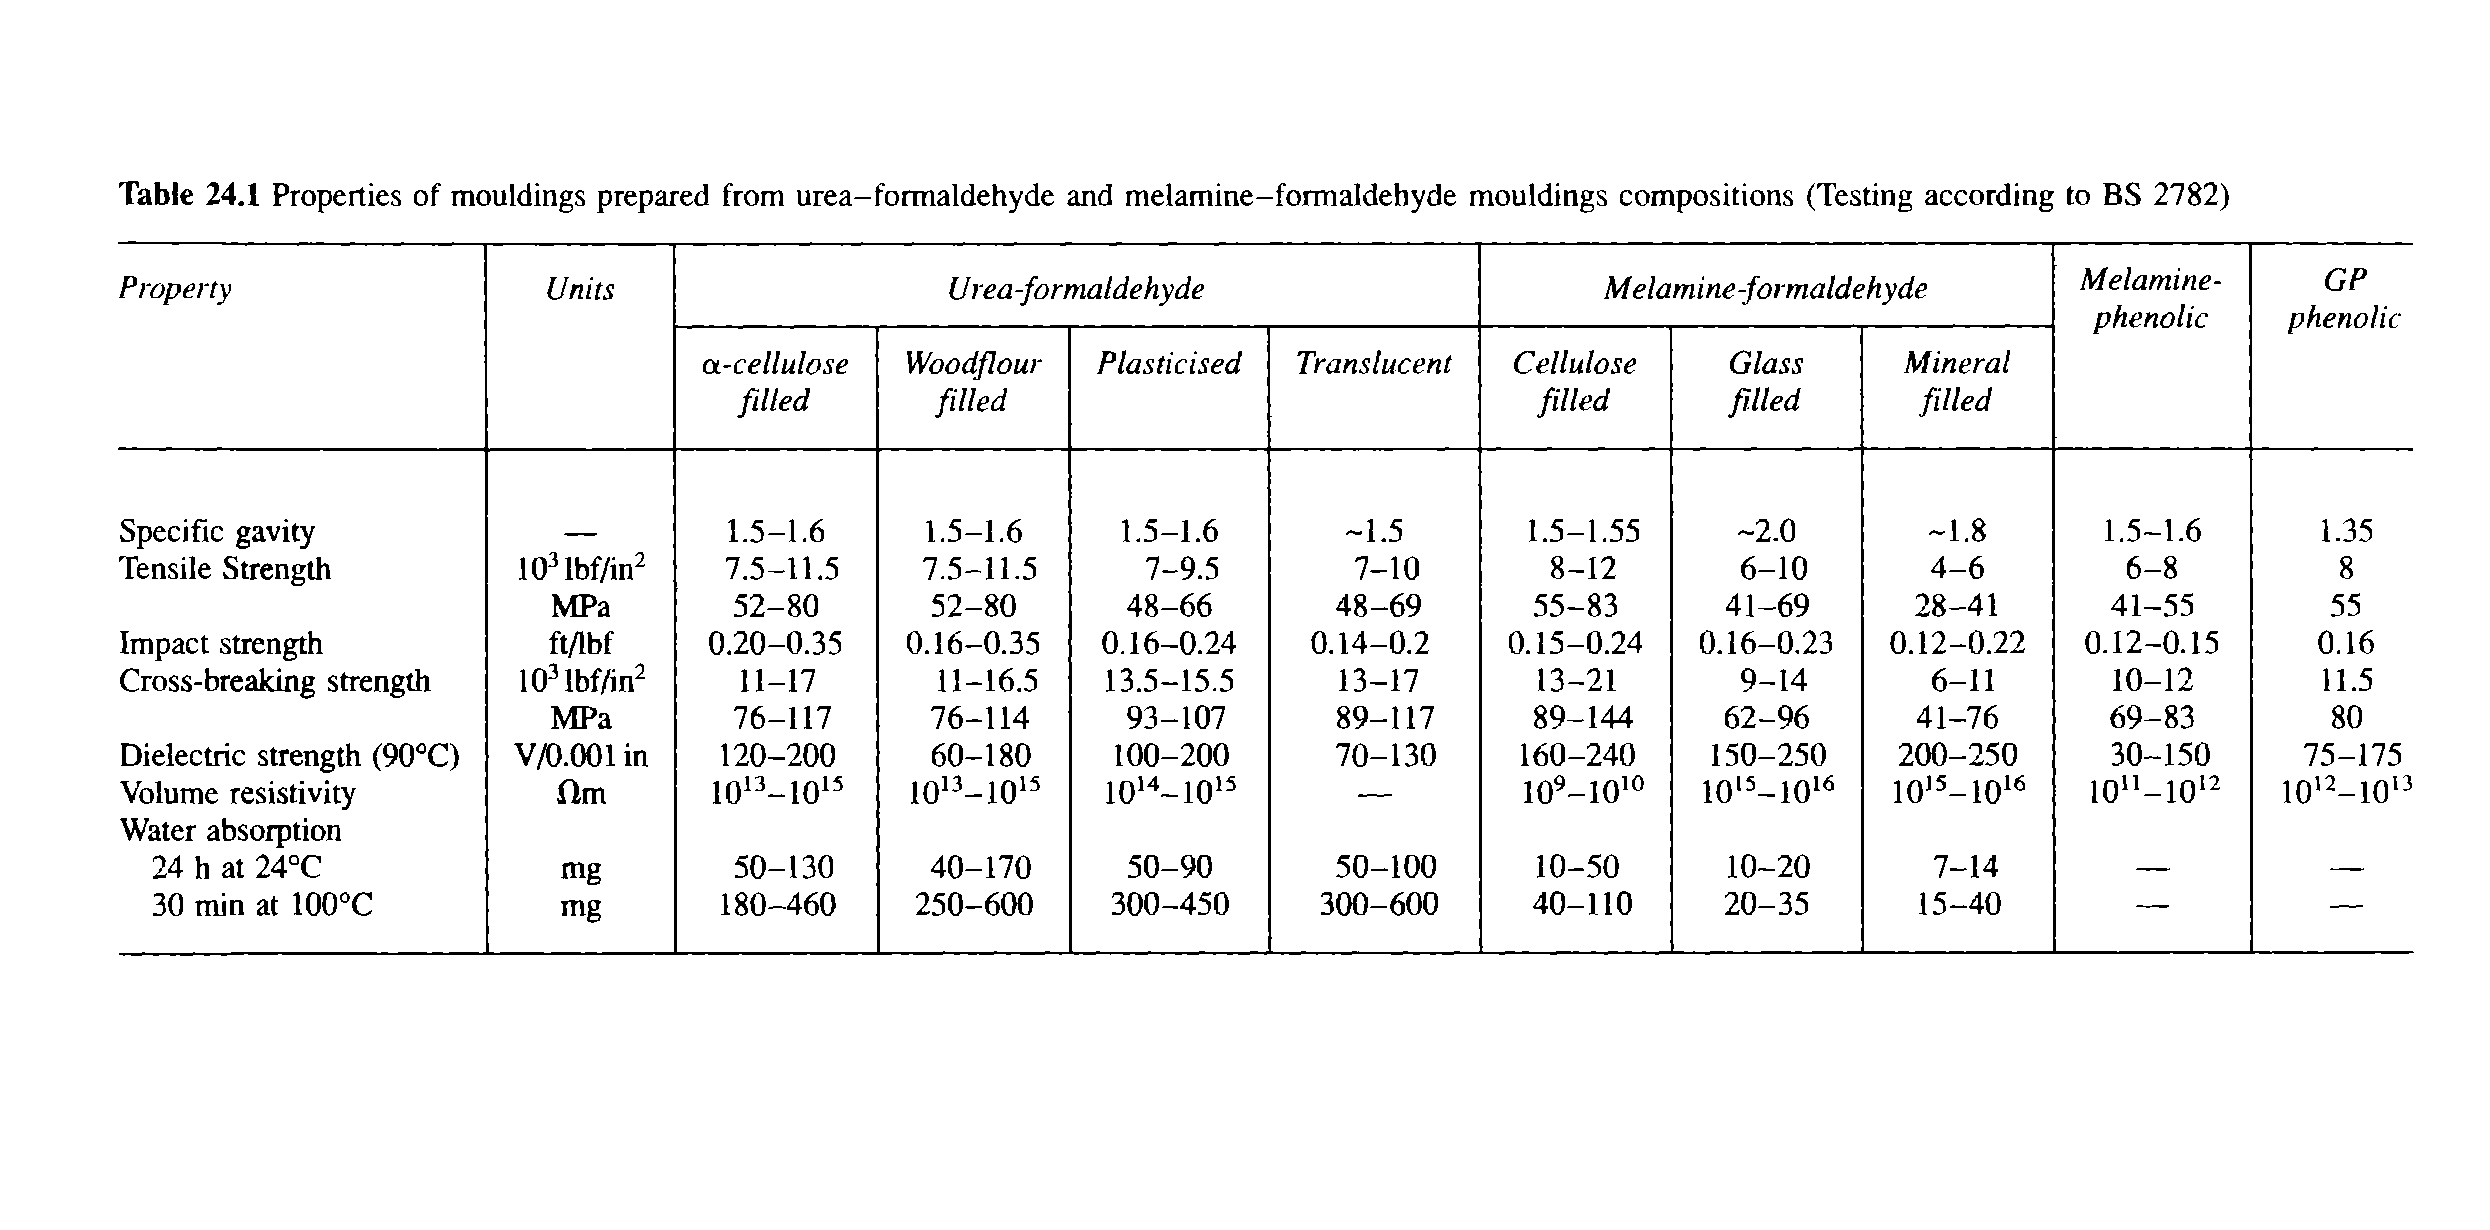 Table 24.1 Properties of mouldings prepared from urea-formaldehyde and melamine-formaldehyde mouldings compositions (Testing according to BS 2782)...